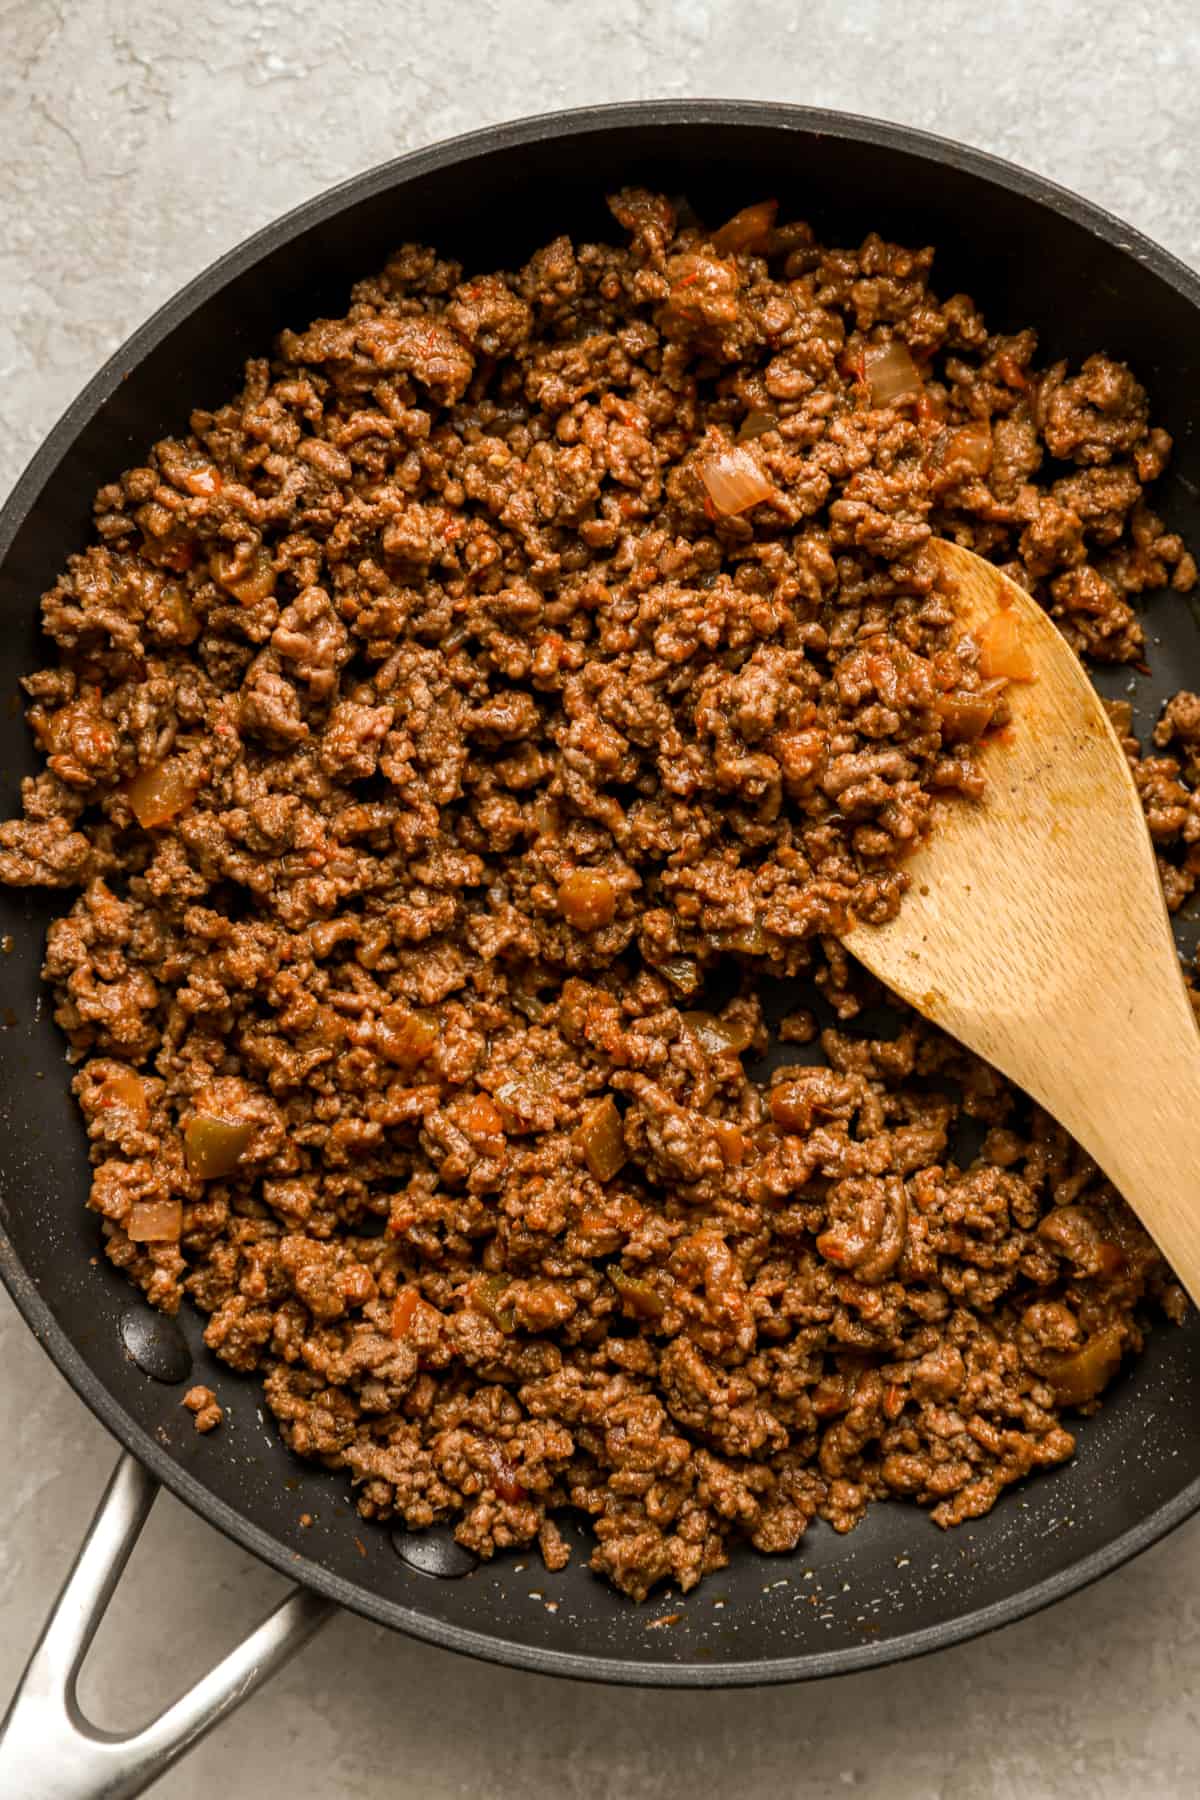 cooked ground beef in a skillet from above.